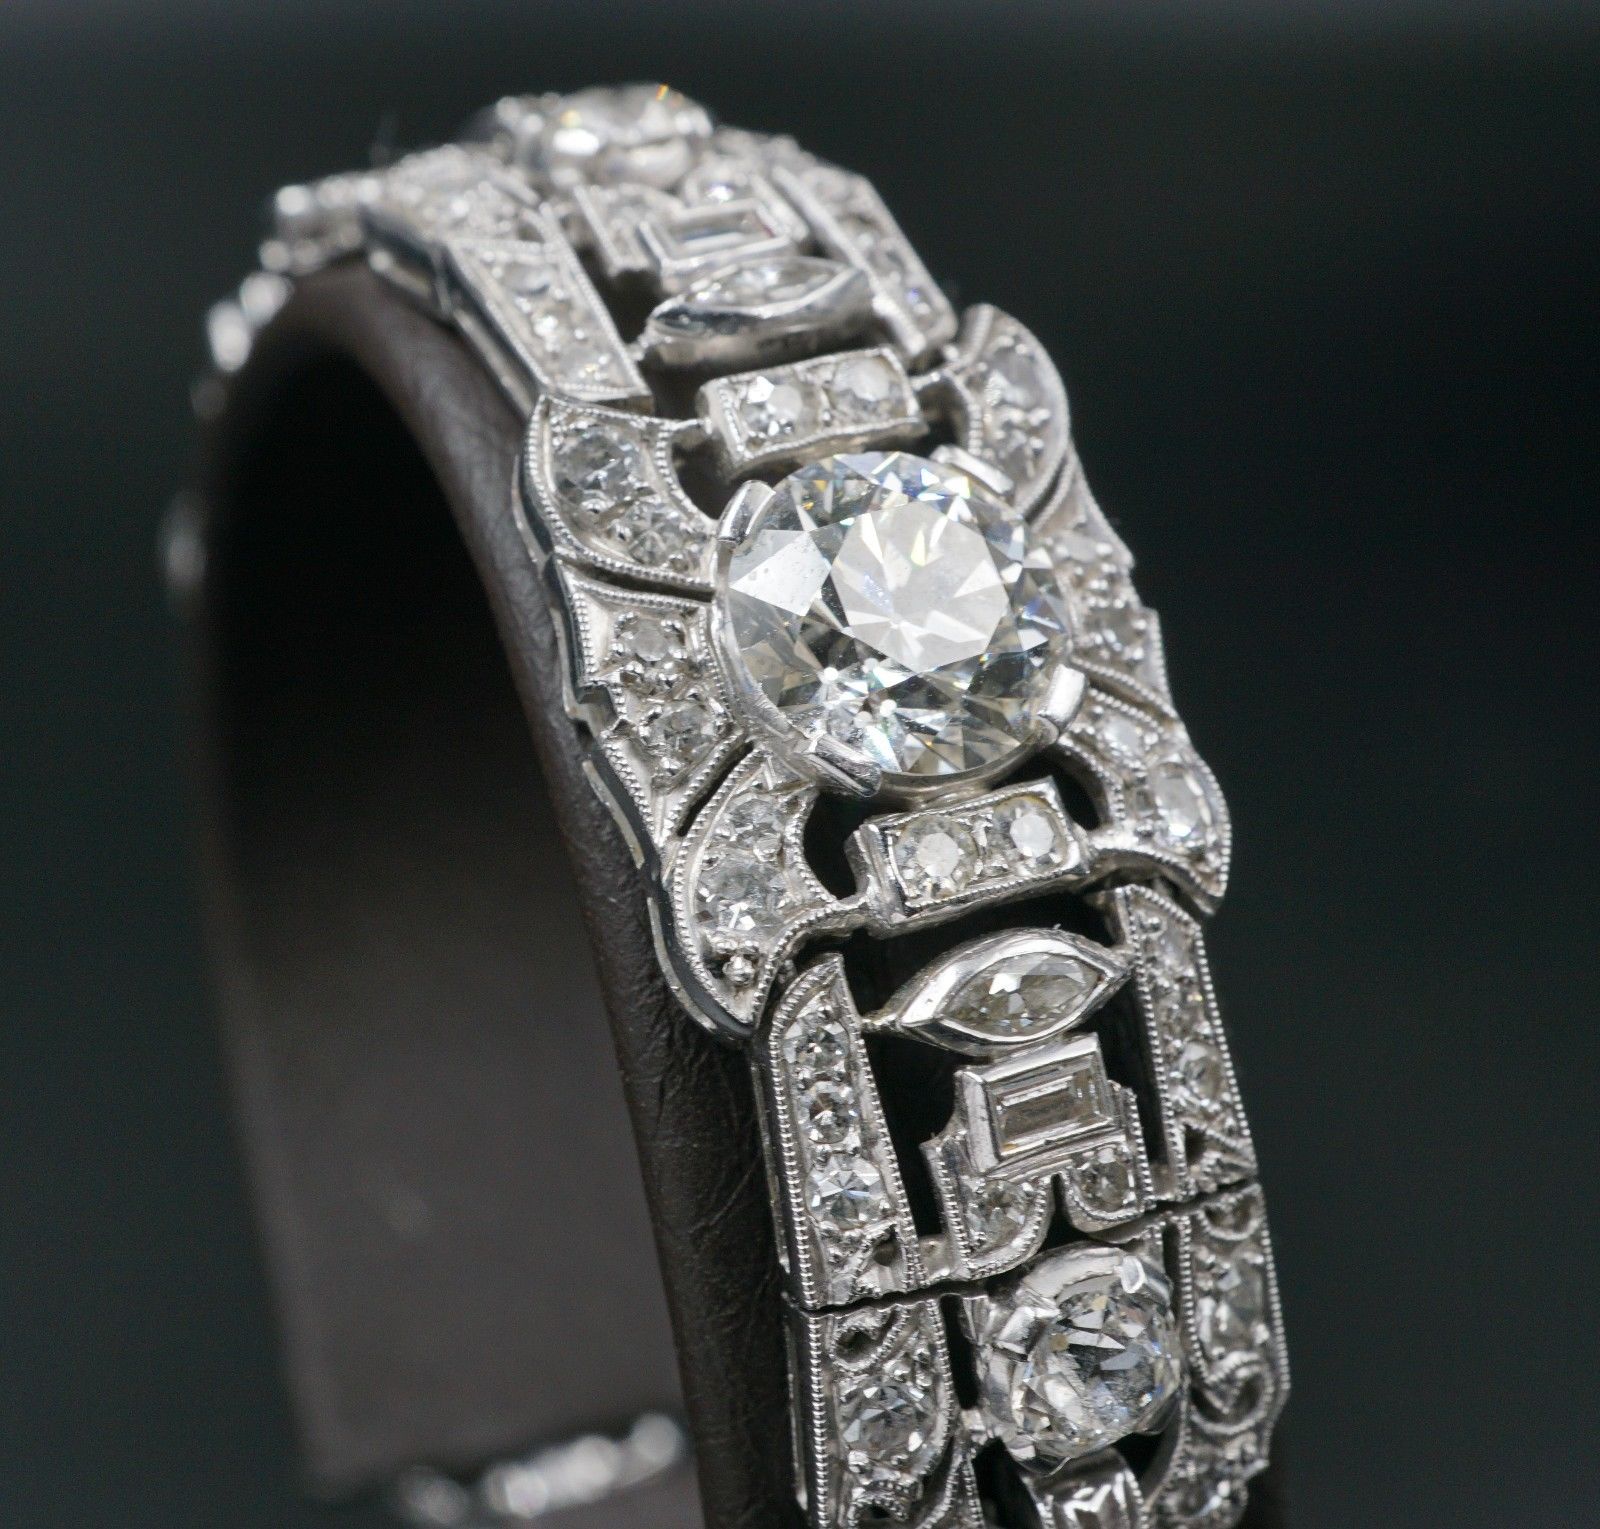 Bracelet: Edwardian era Art Deco design open filigree natural diamond link design, fastening with a fold-over locking clasp with safety chain | 205 diamonds | 8.91 carats |Appraisal: $110,500